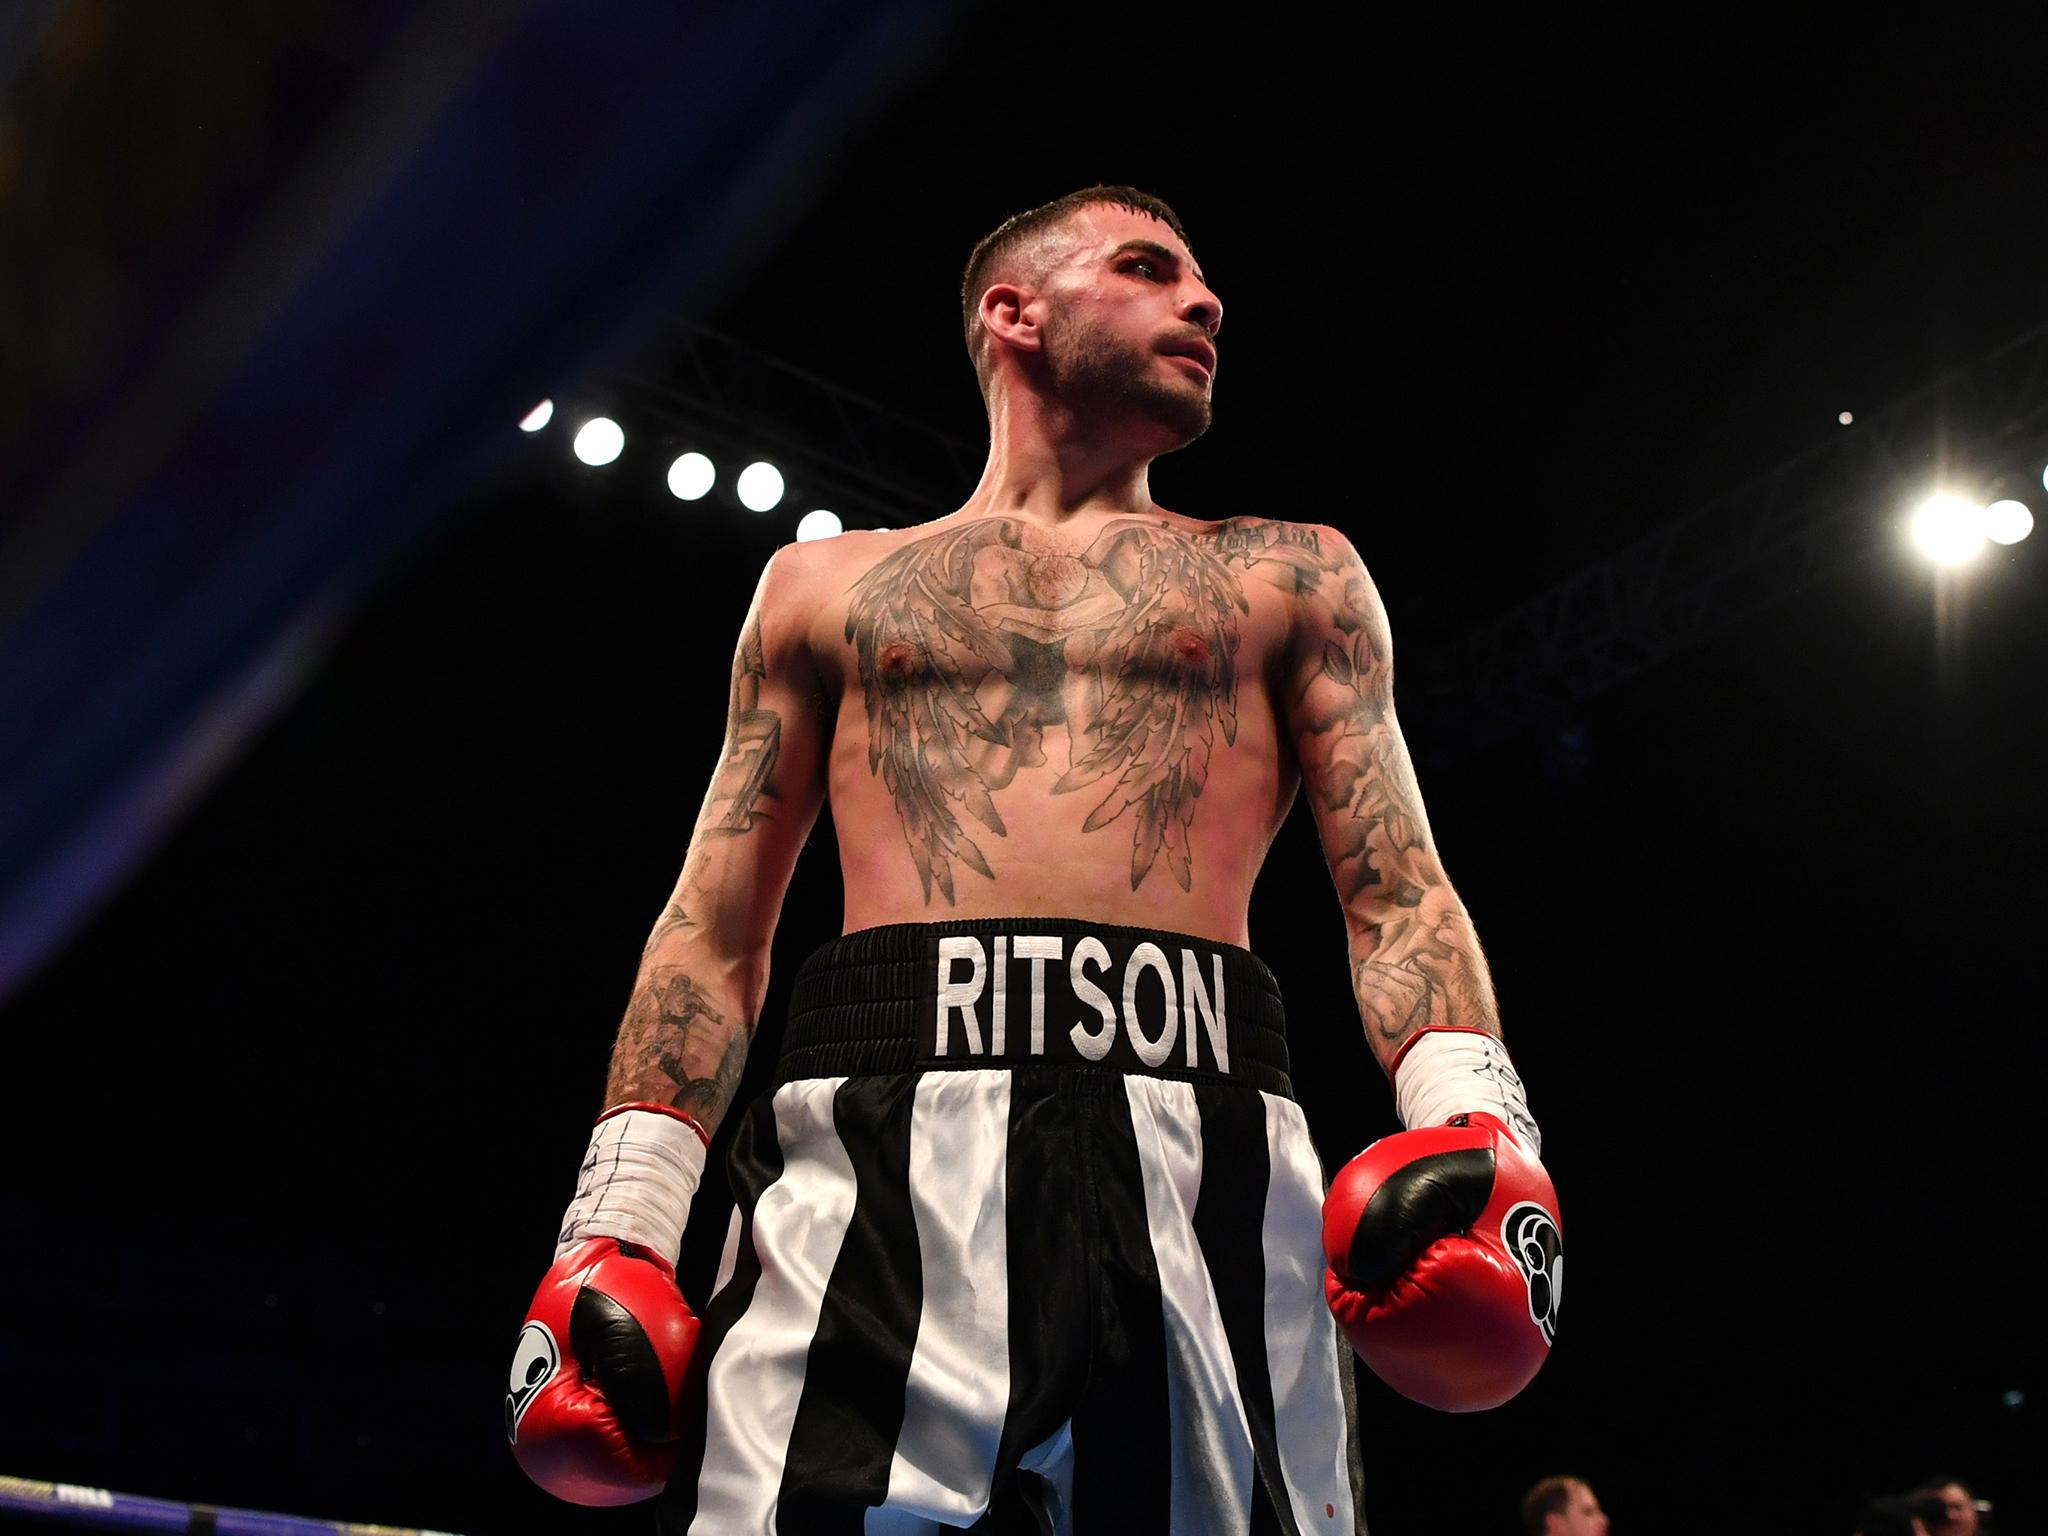 Lewis Ritson defends his British lightweight championship against Paul Hyland Jr